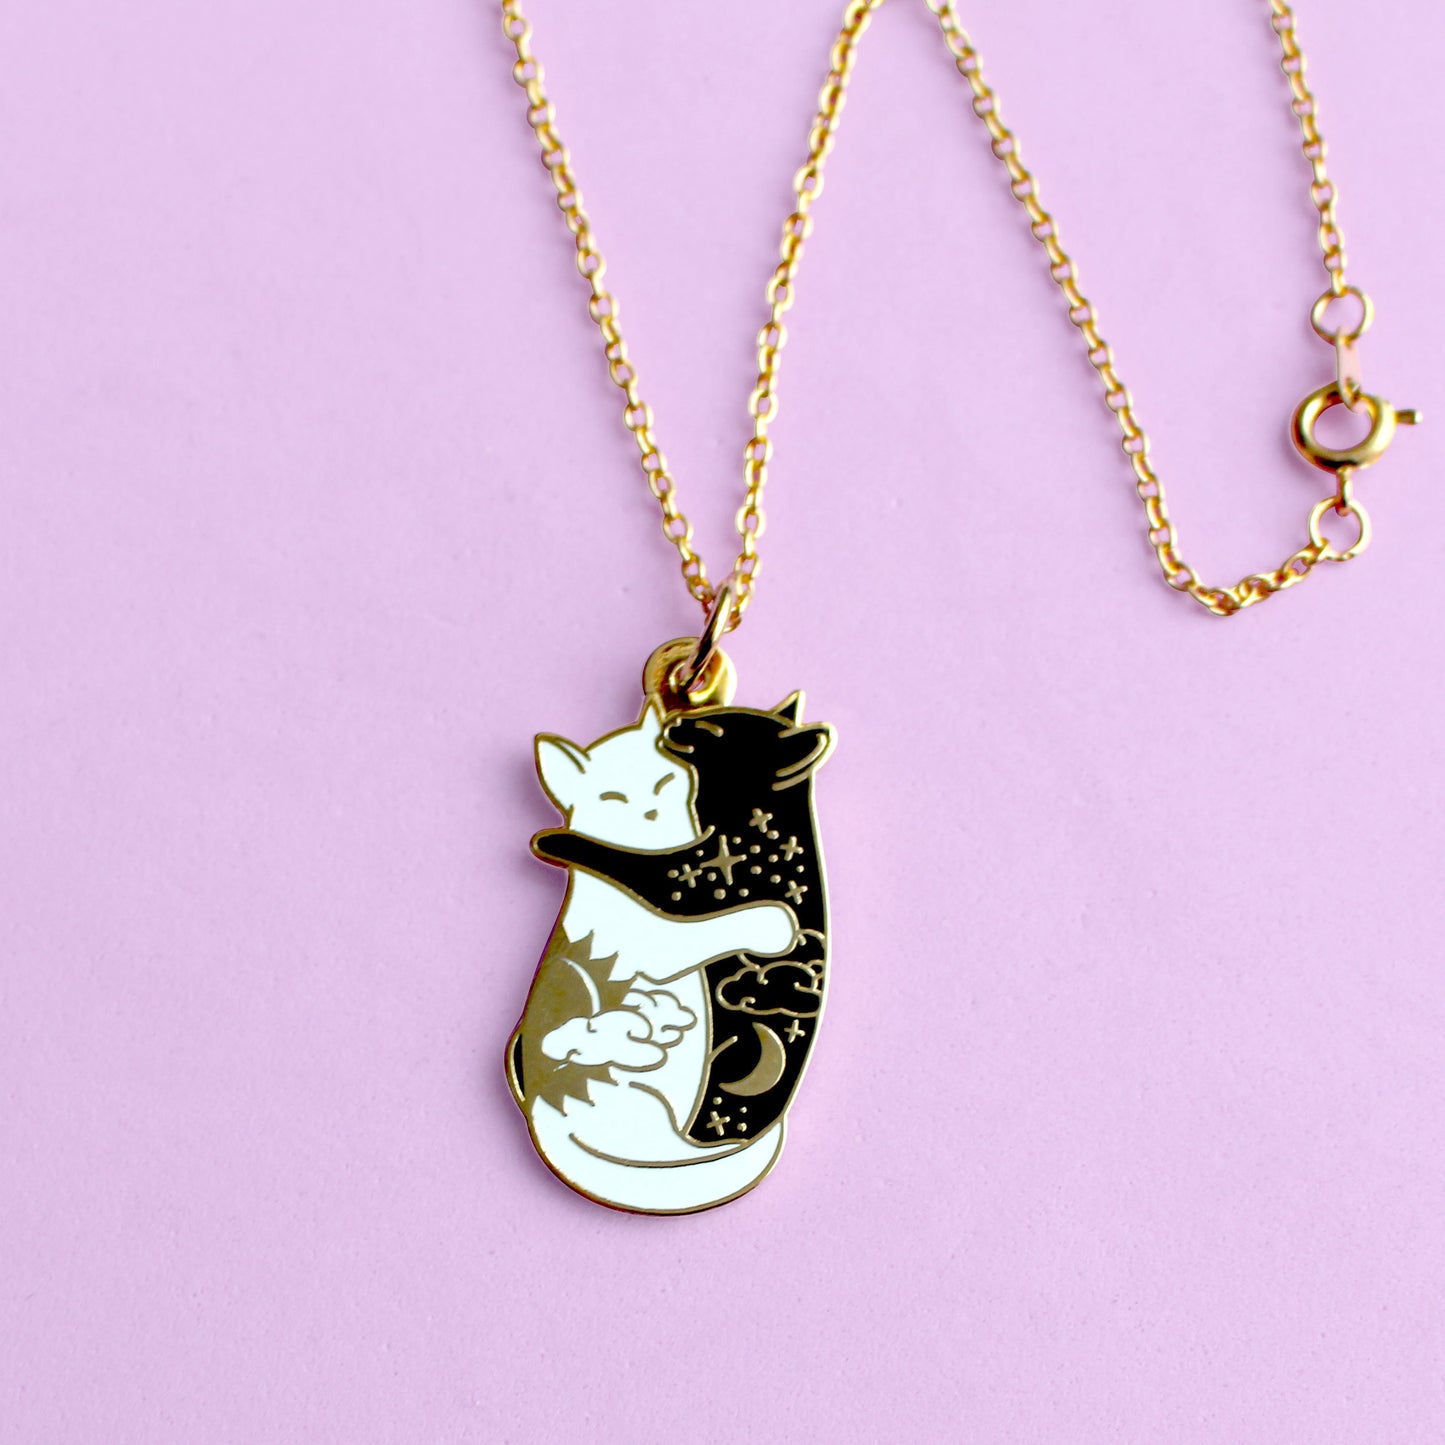 Day & Night Hugging Cats Necklace